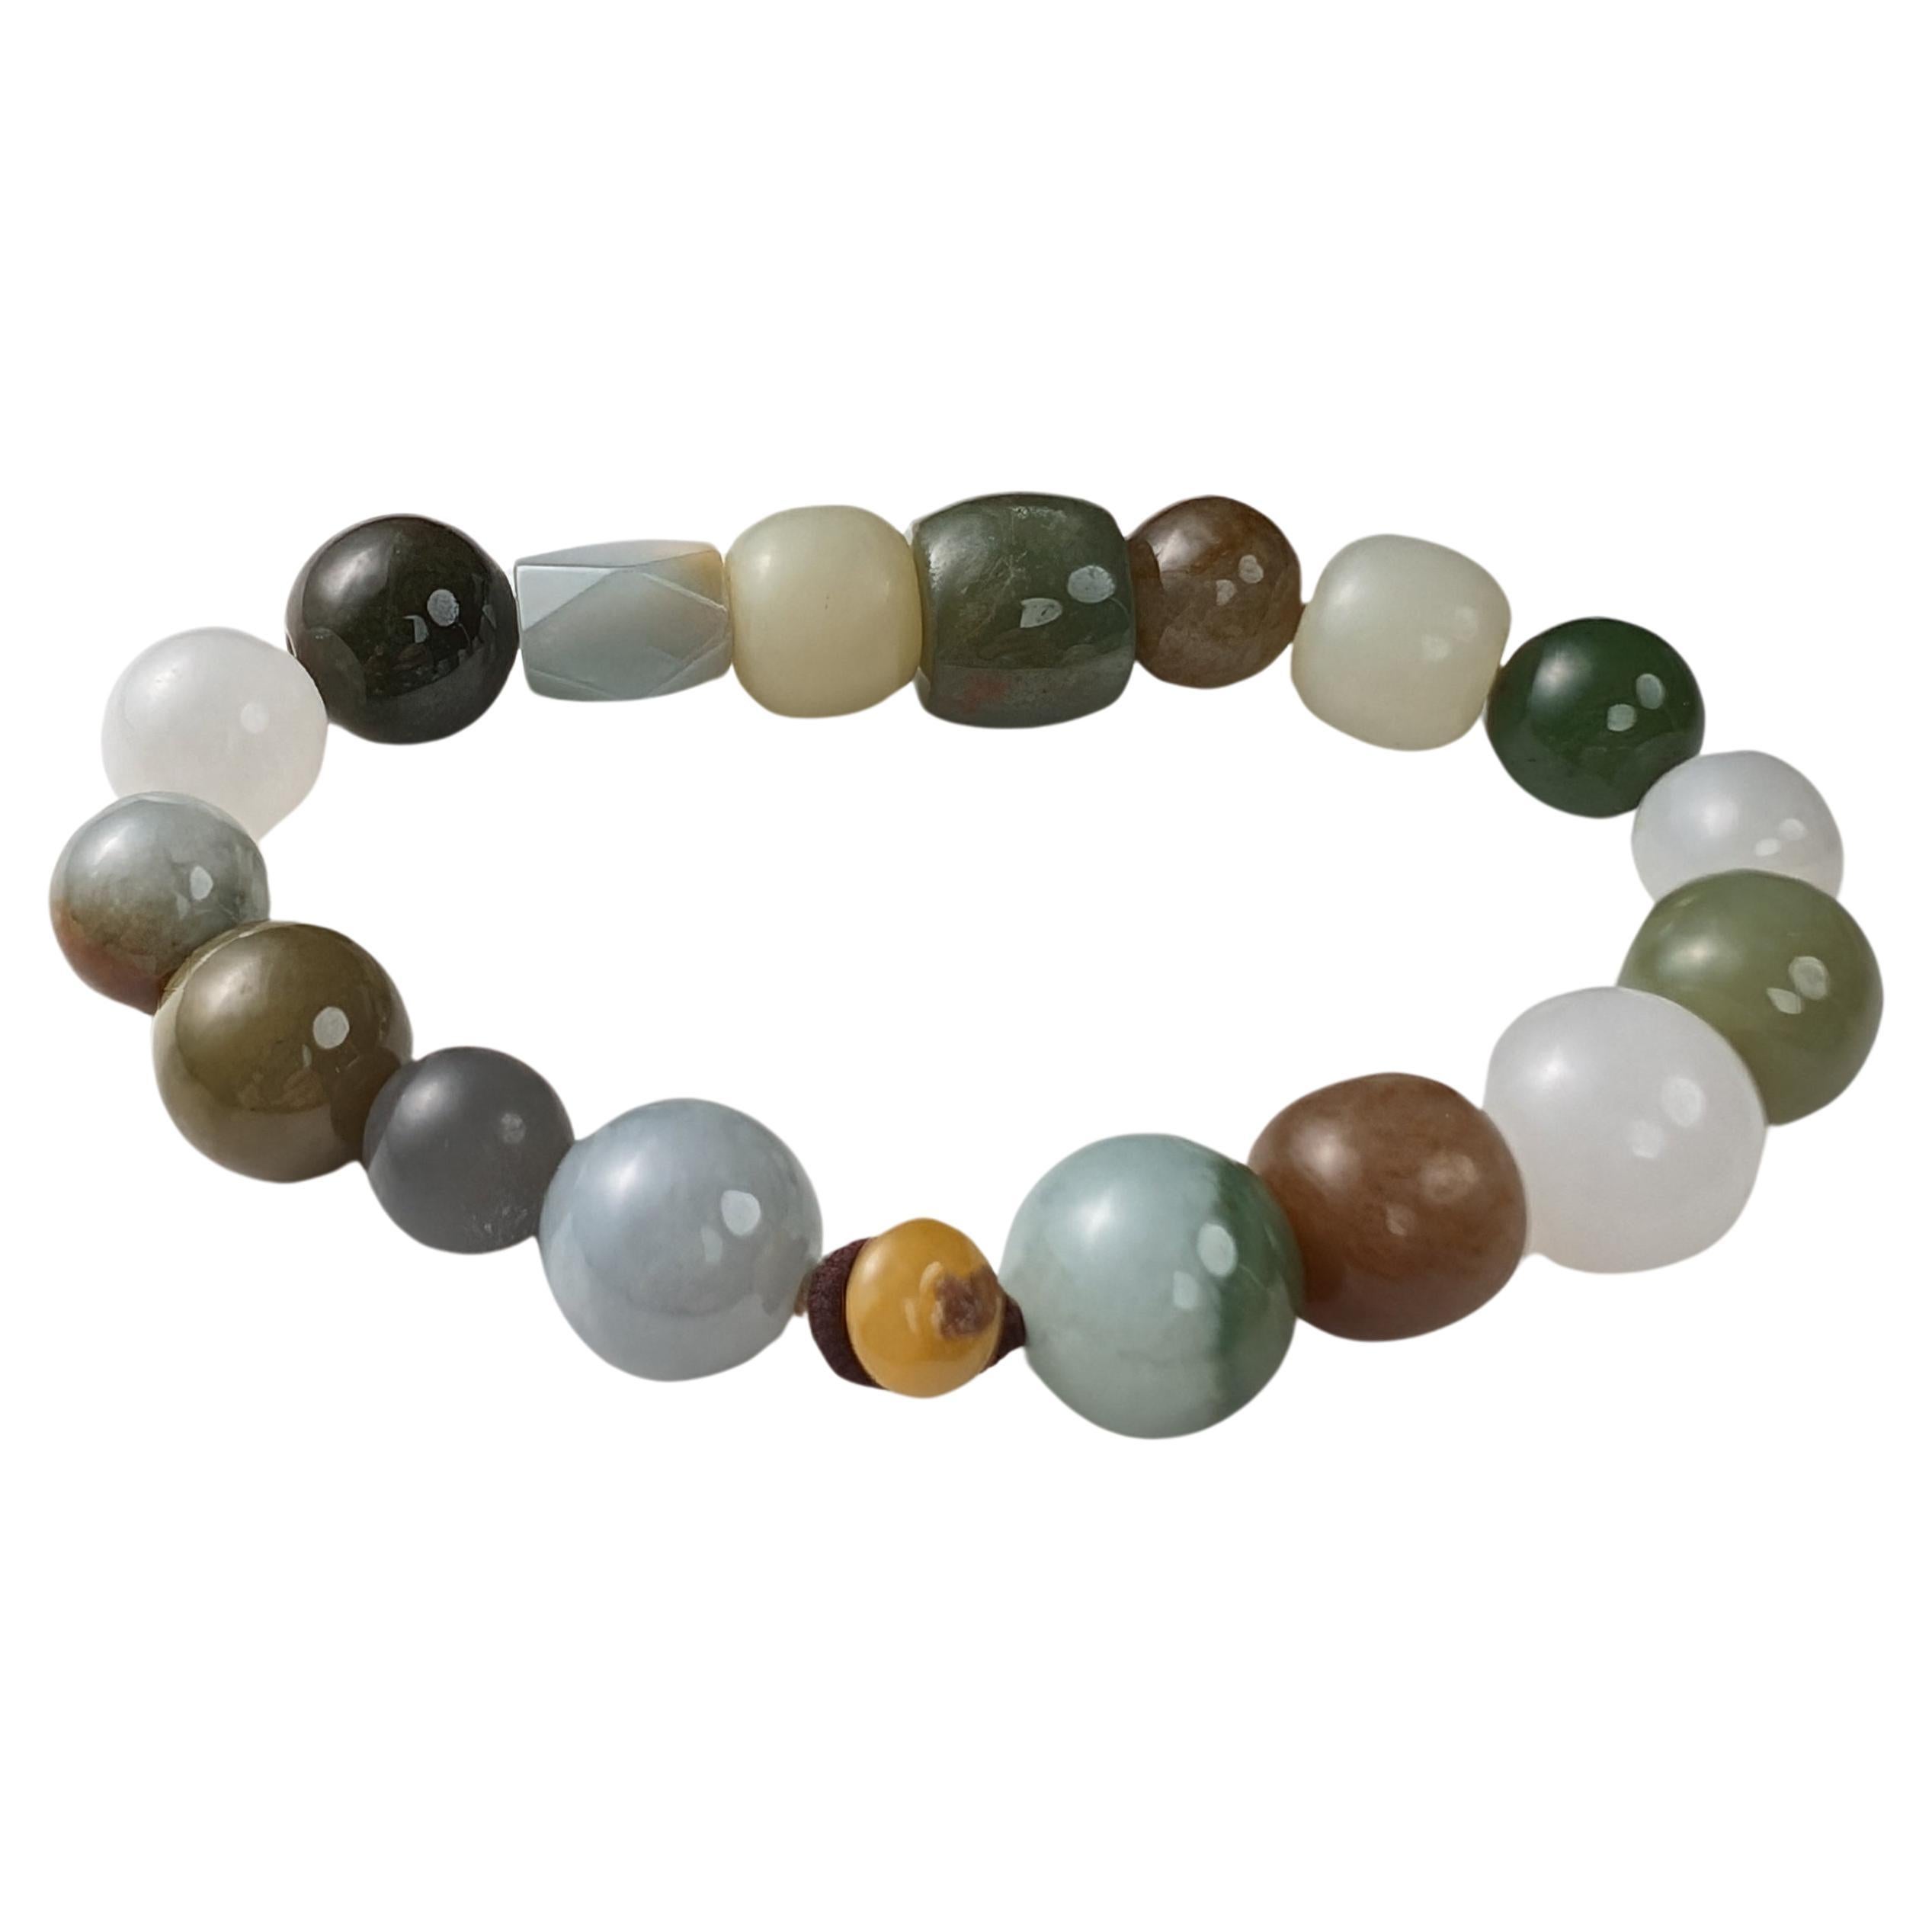 Beaded Bracelet Jadeite & Nephrite, One-of-a-Kind, Certified Untreated, New, 8" For Sale